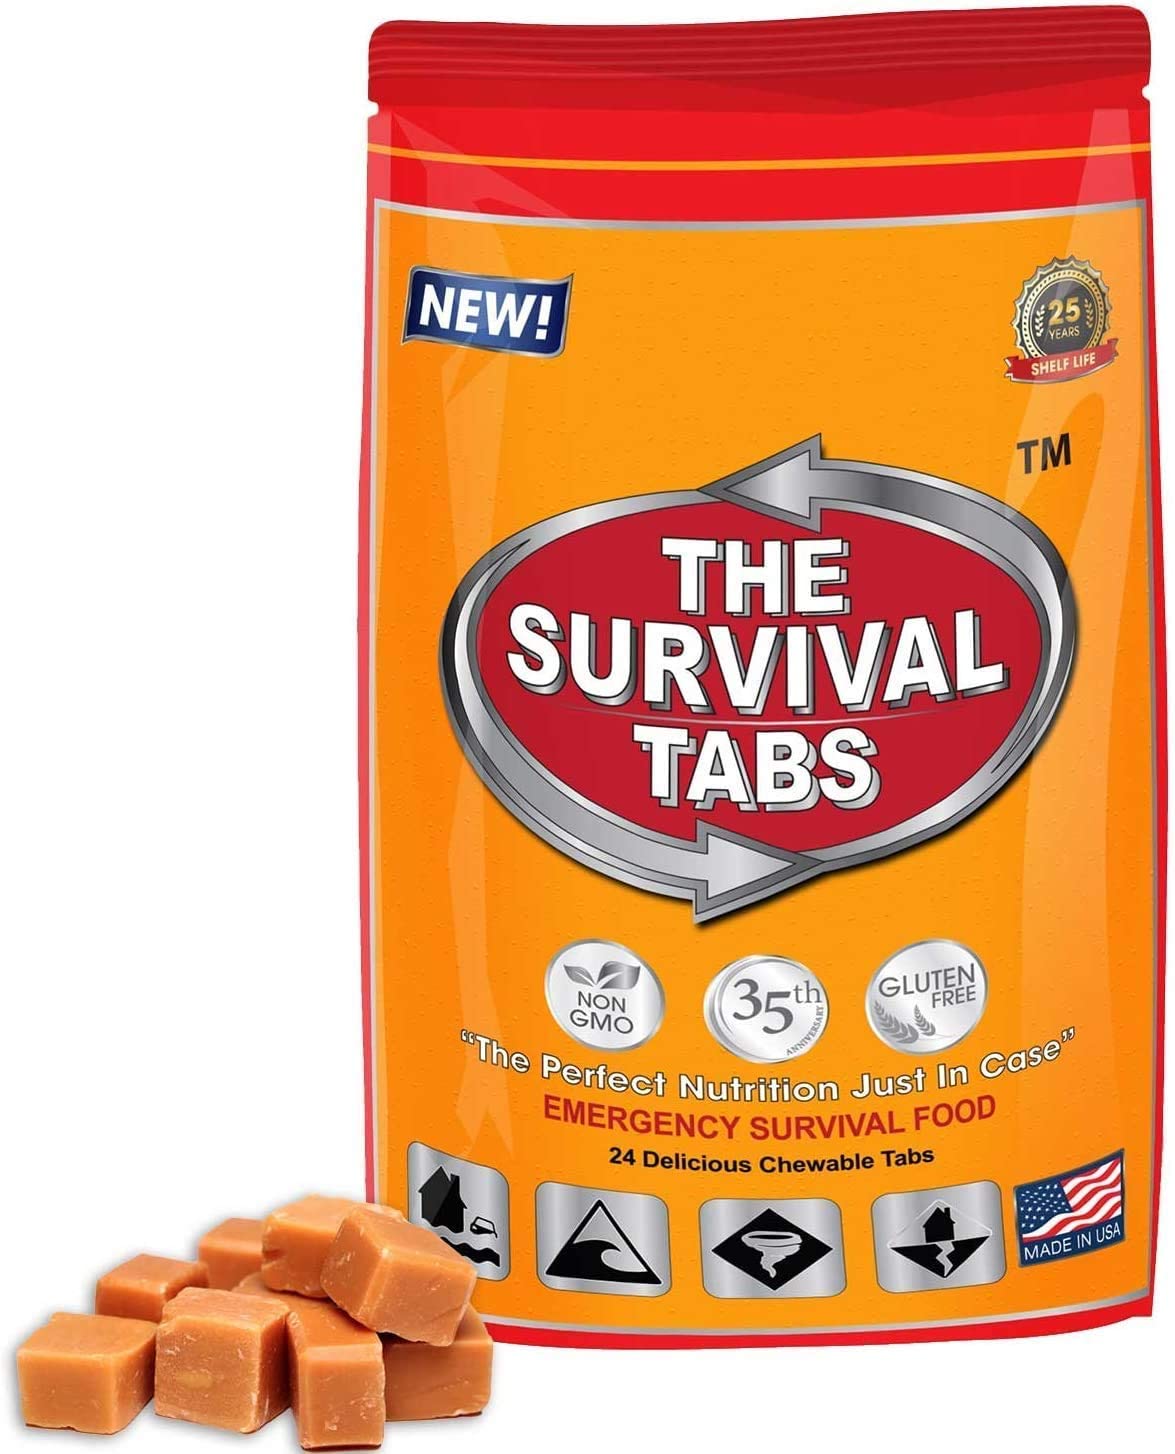 48 hours survival food tablets none-GMO gluten-free 25 years shelf life (butterscotch/ 1 pouch)